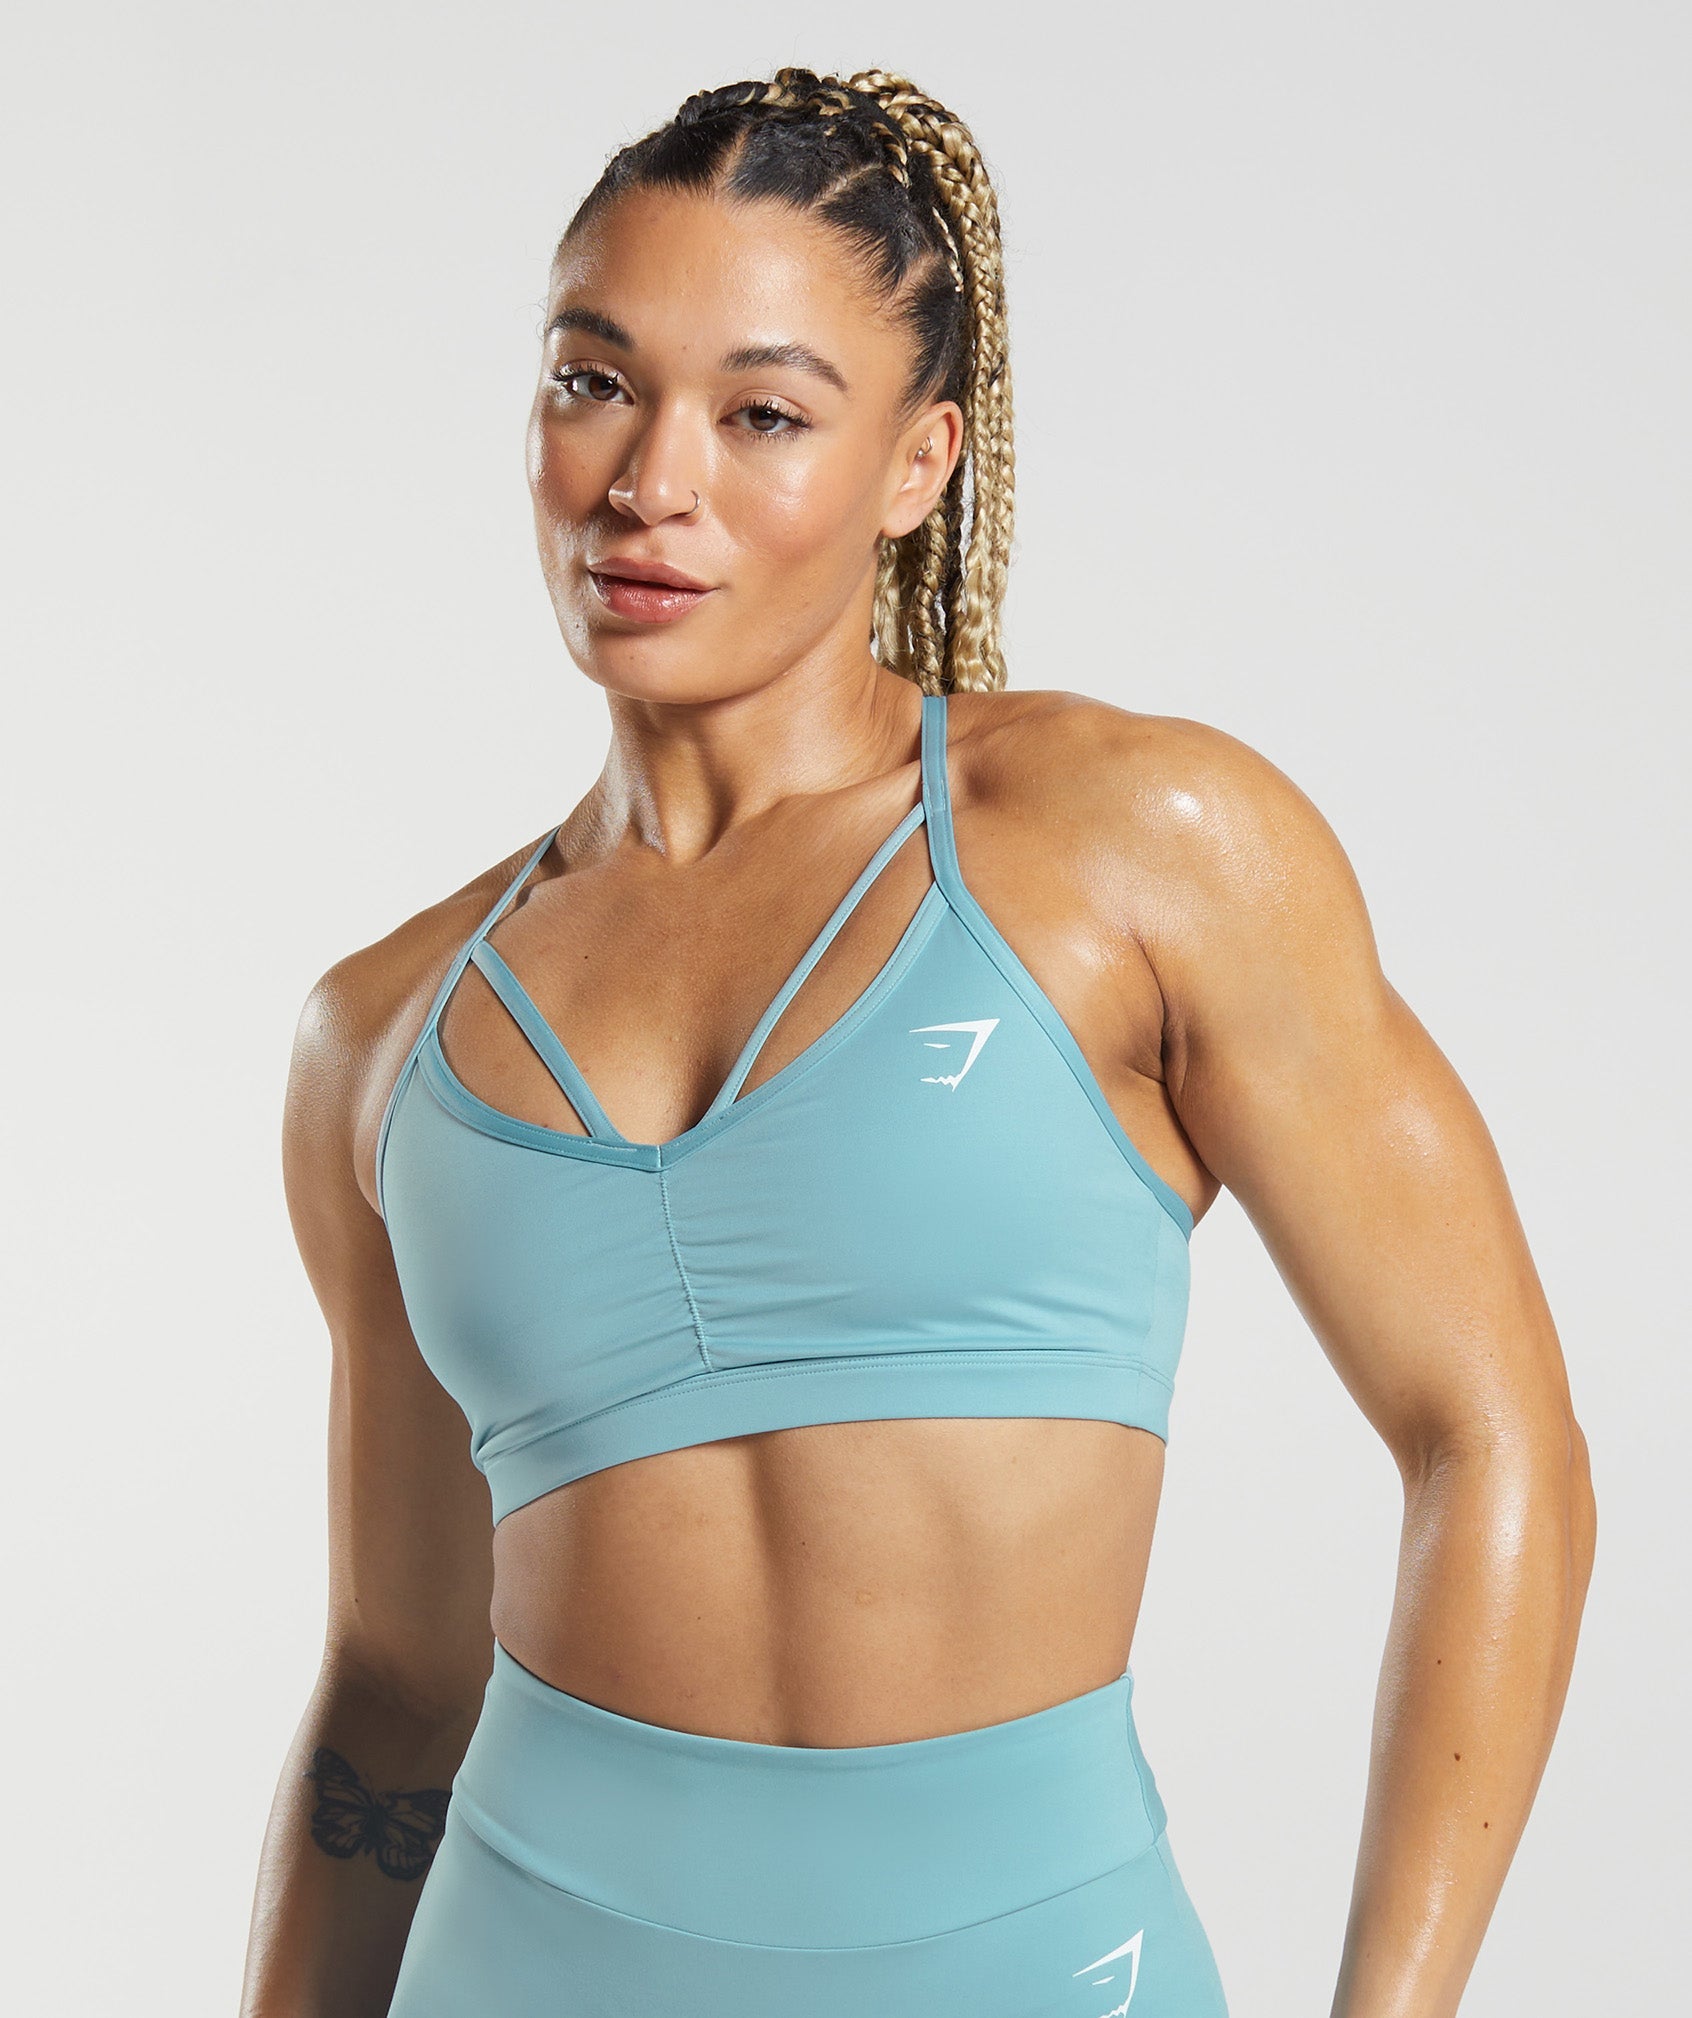 Gymshark Women's Blue Crossover Adjustable Support Workout Sports Dry Bra  Size S